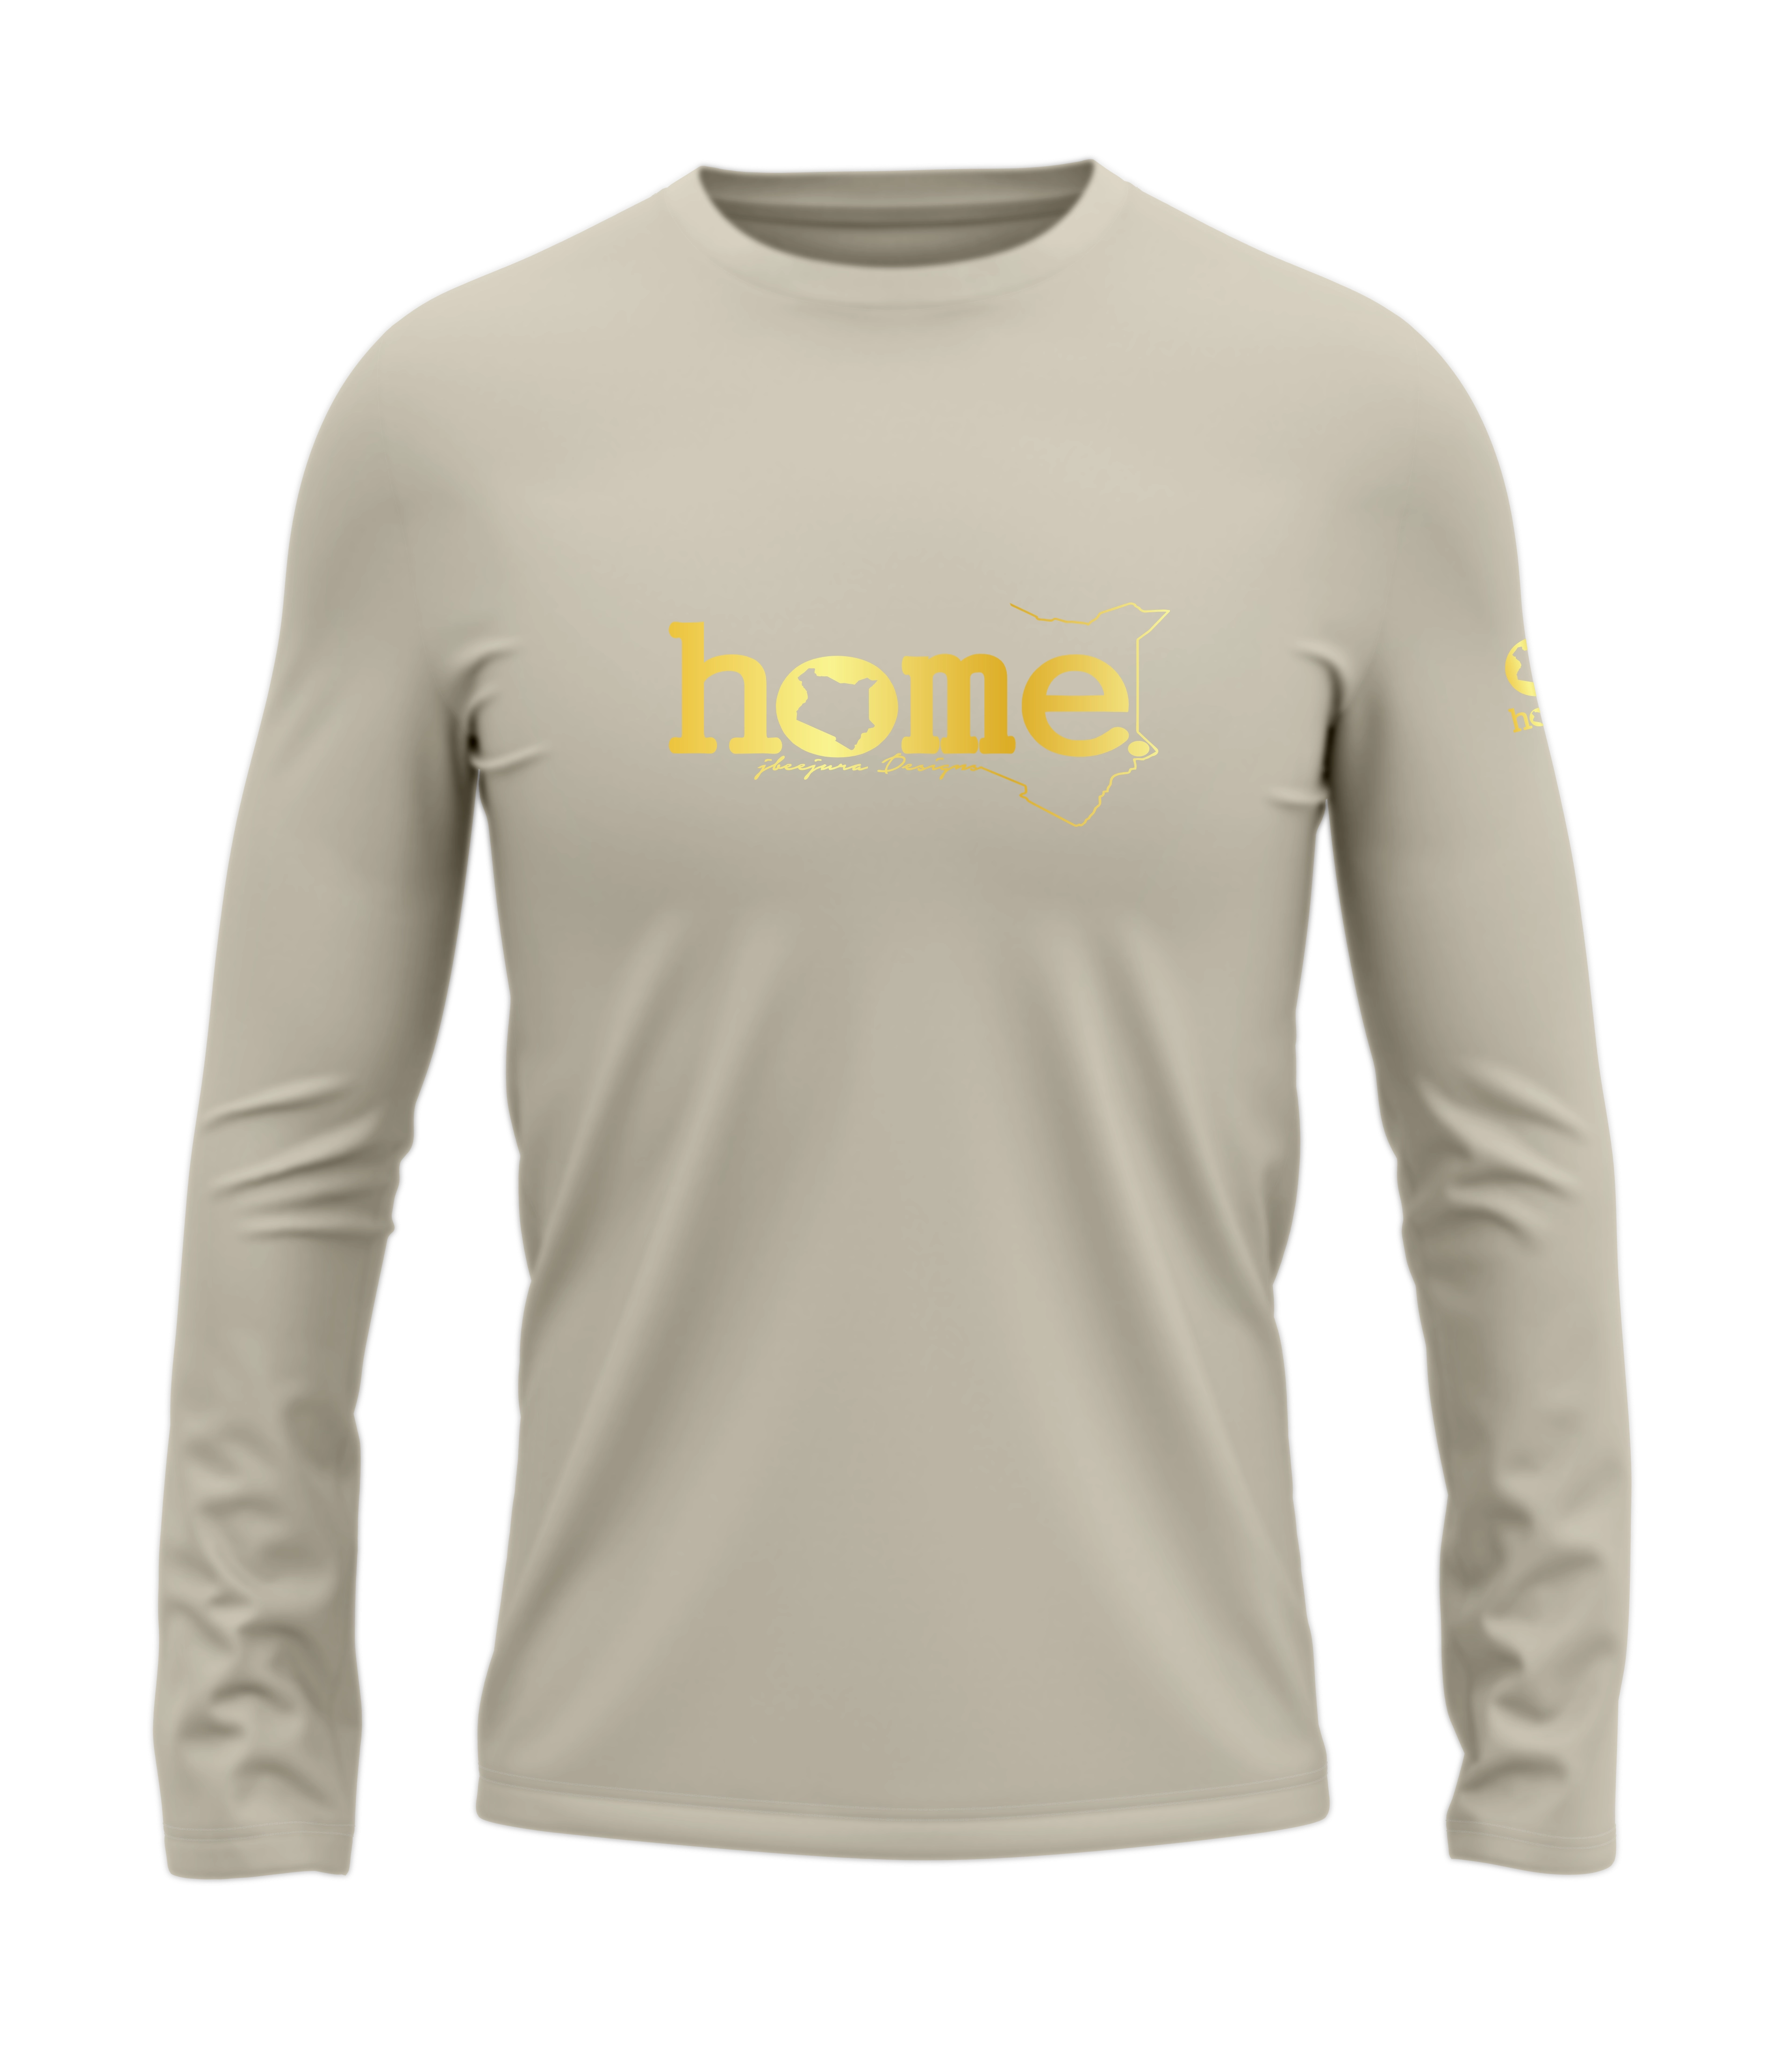 home_254 LONG-SLEEVED NUDE T-SHIRT WITH A GOLD CLASSIC WORDS PRINT – COTTON PLUS FABRIC